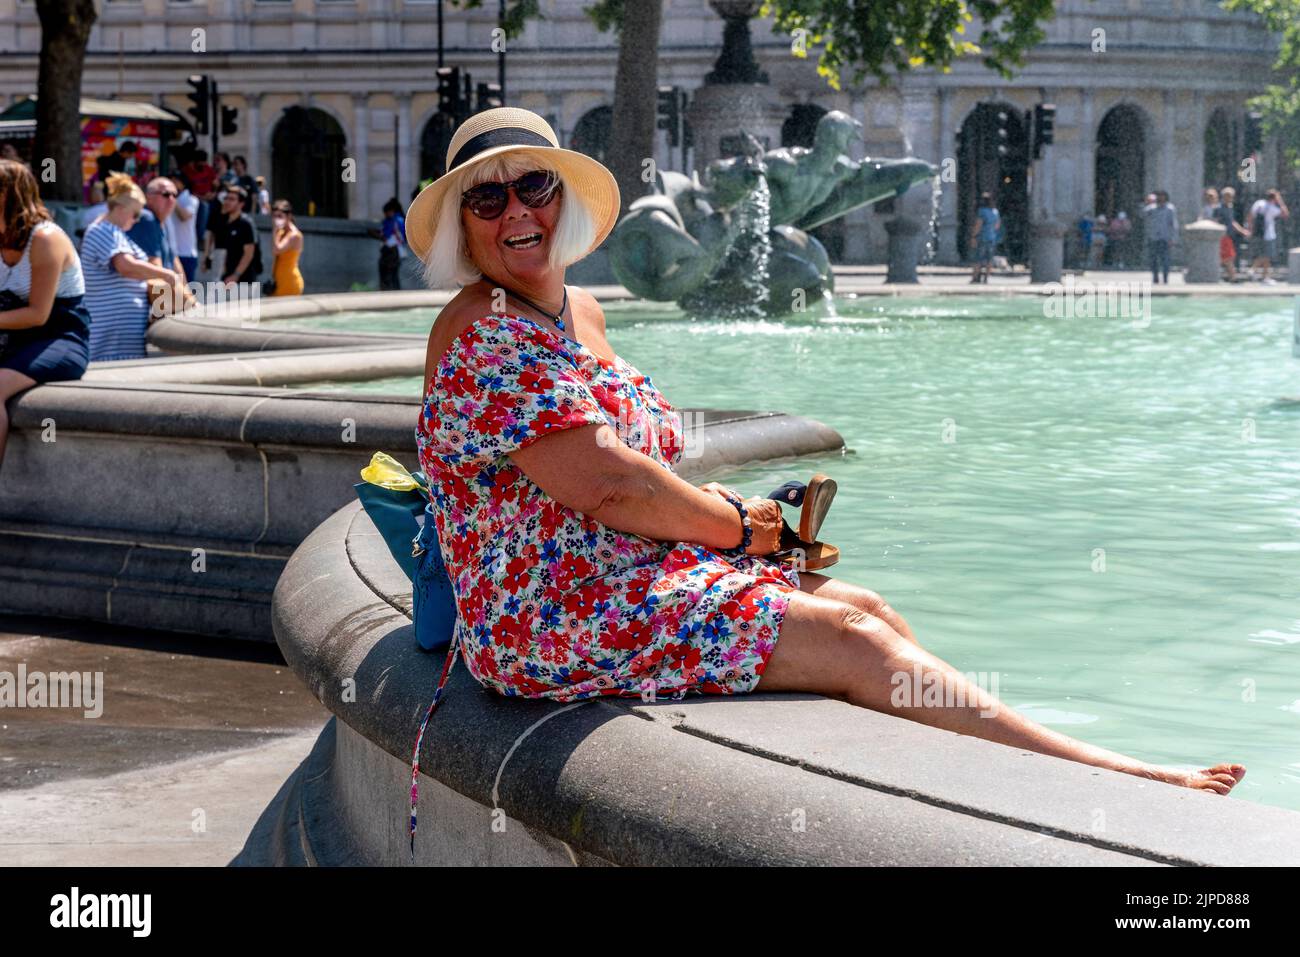 A Woman Cools Off In The Fountains In Trafalgar Square On The Hottest Day Ever Recorded, London, UK Stock Photo